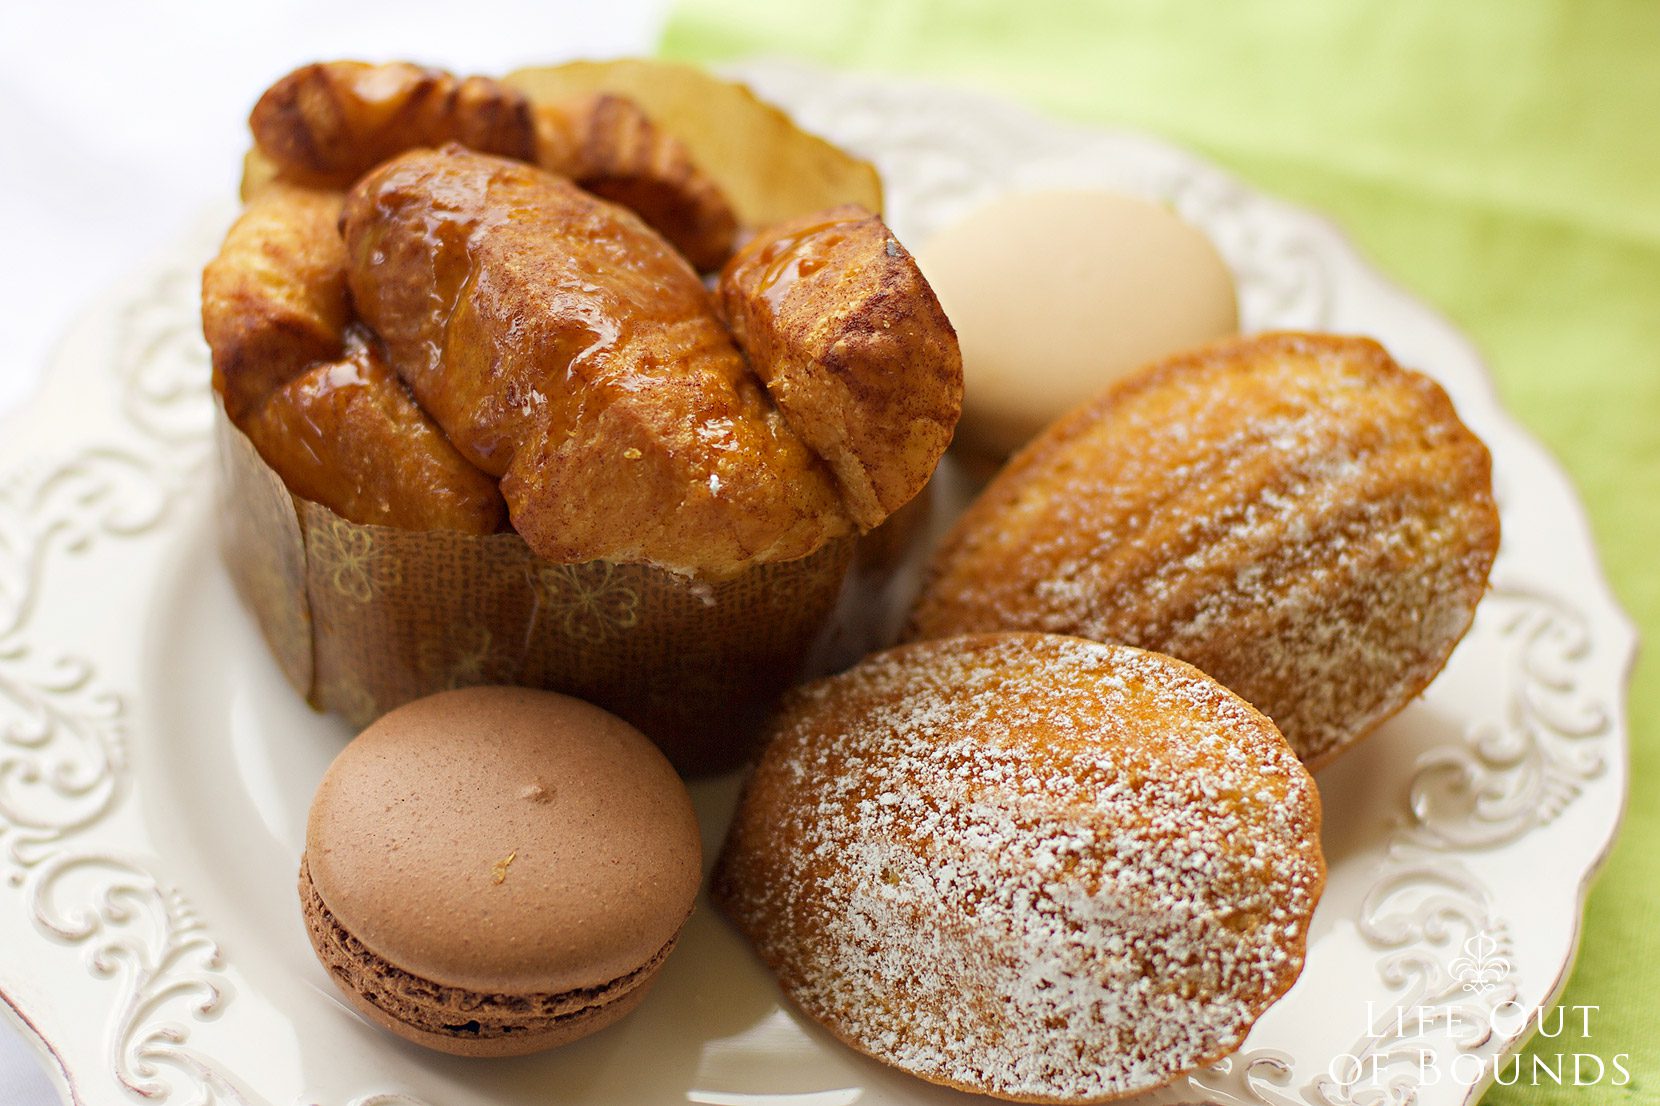 Monkey-Bread-Madeleines-and-Macarons-by-Bouchon-Bakery-in-Yountville-Napa-Valley-California